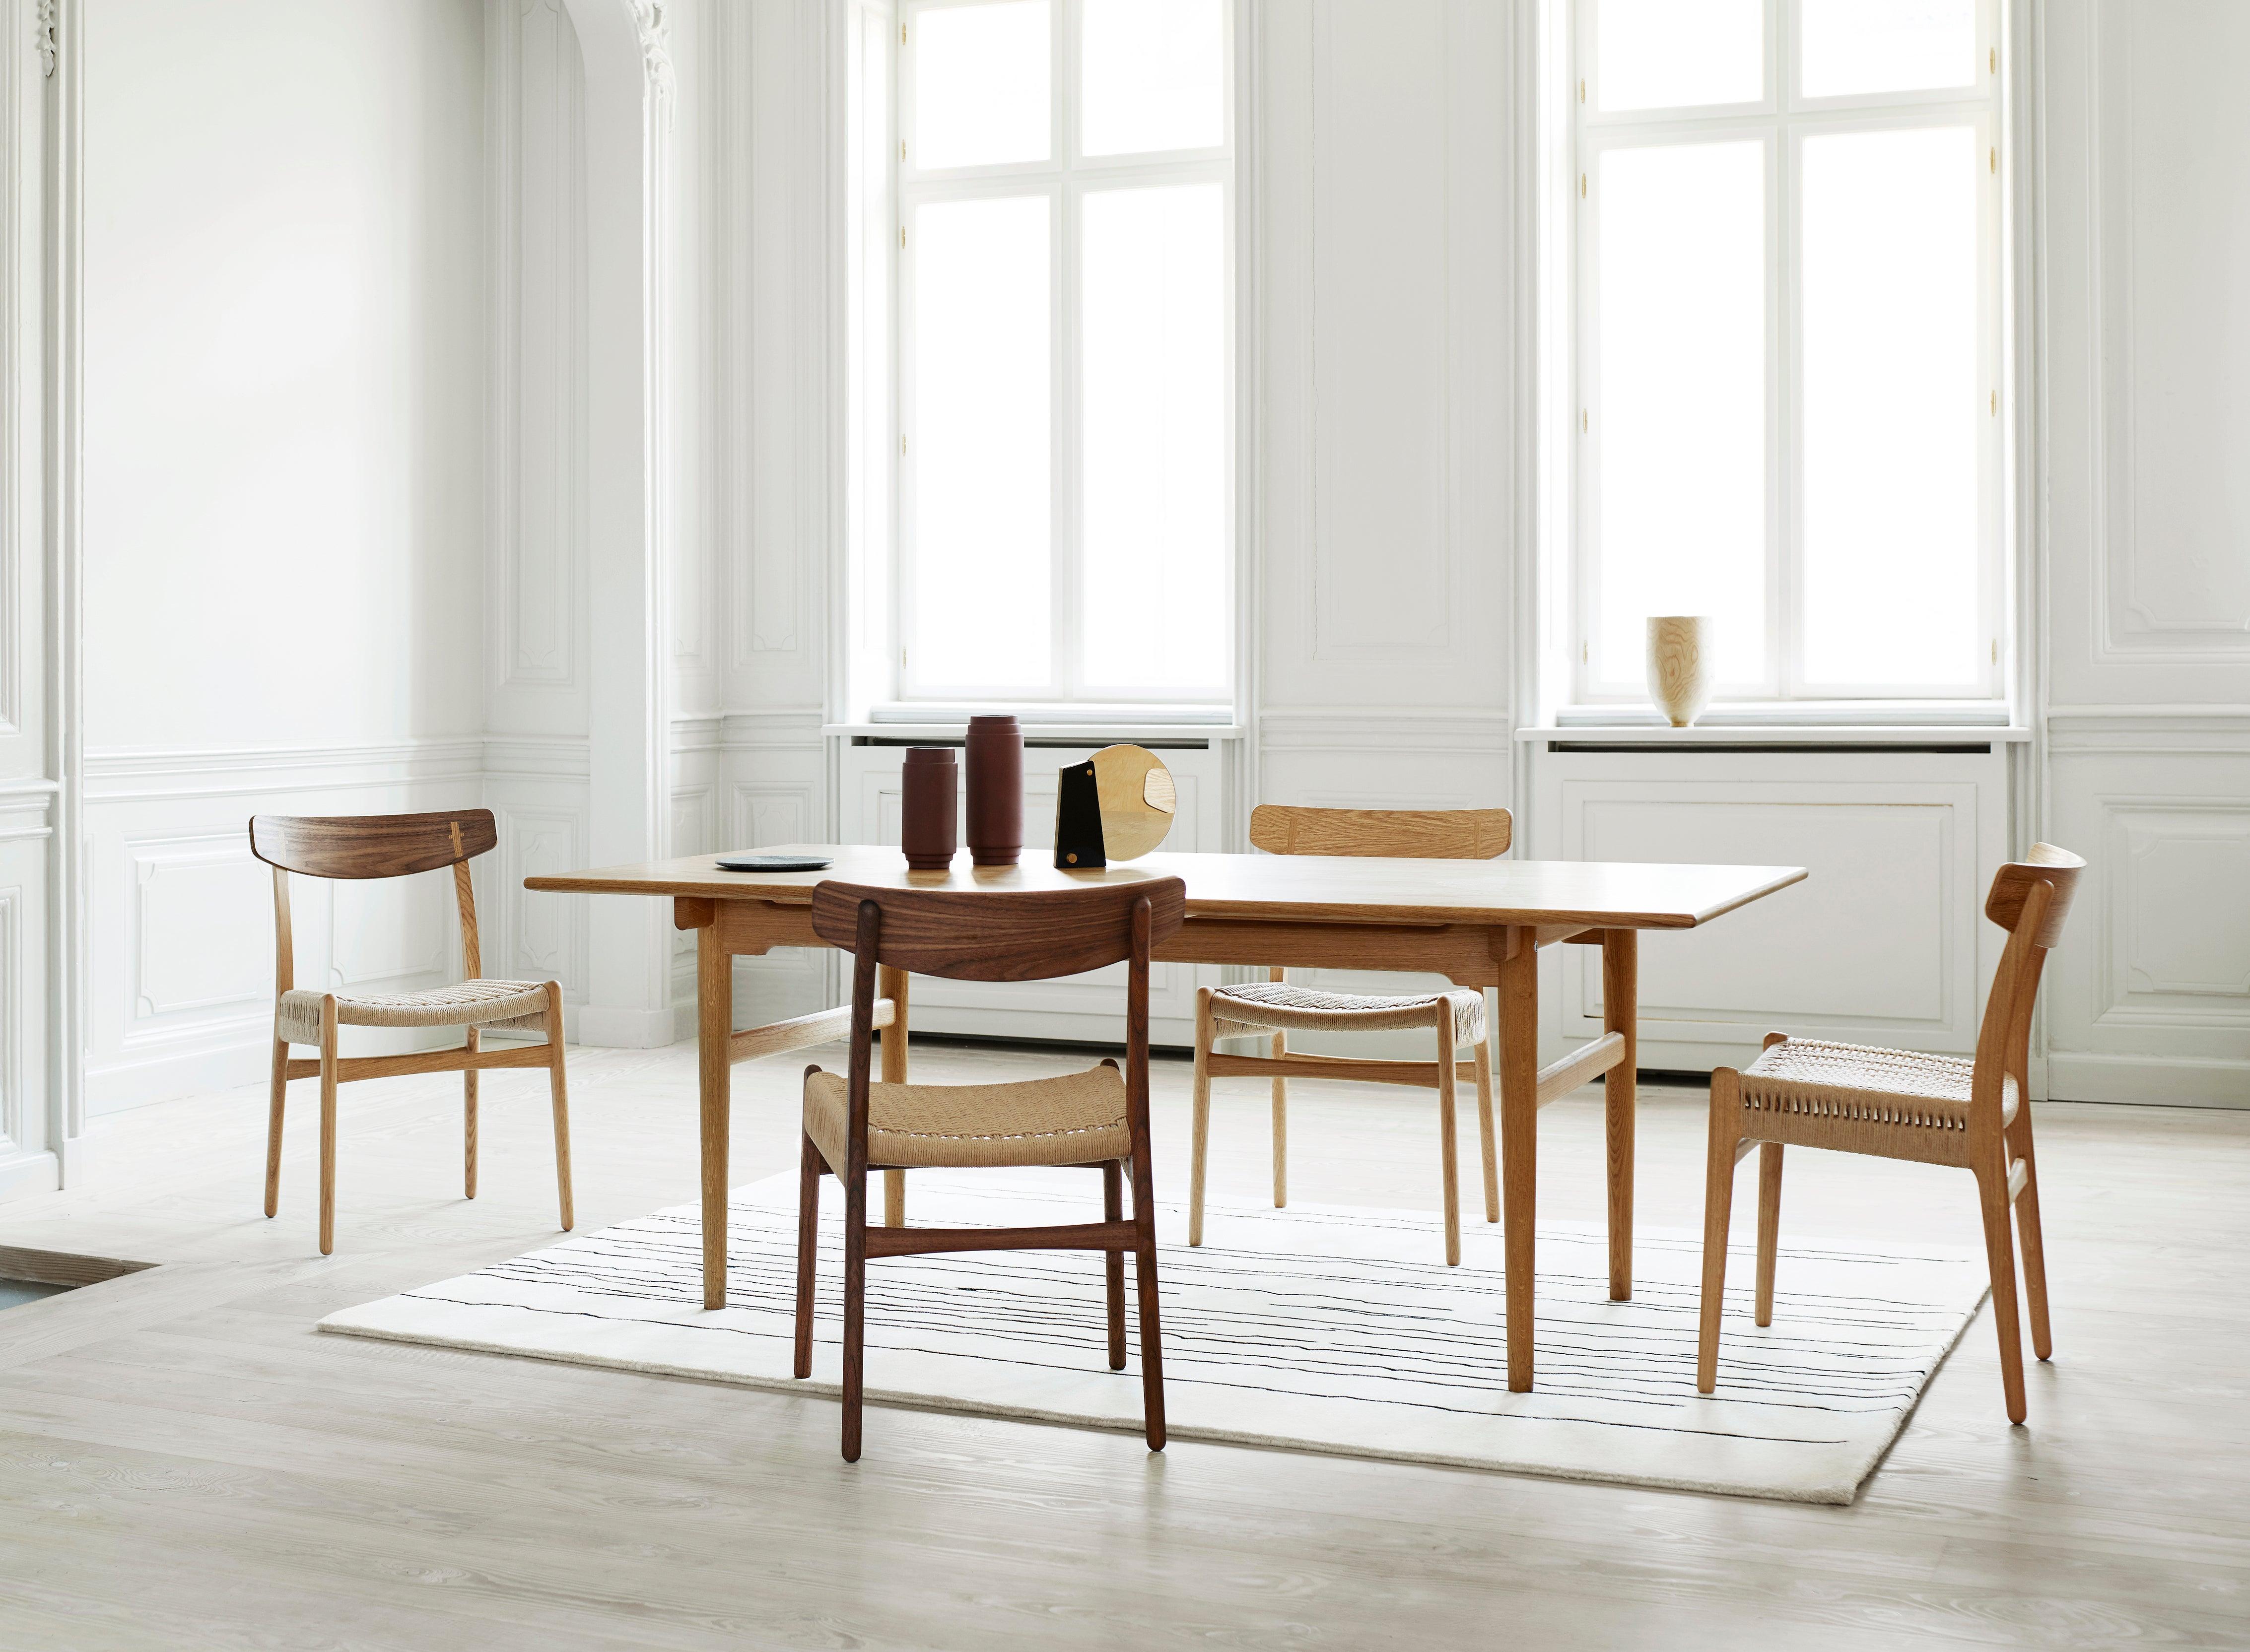 CH23 Dining Chair in Oak Oil with Natural Papercord Seat by Hans J. Wegner 1